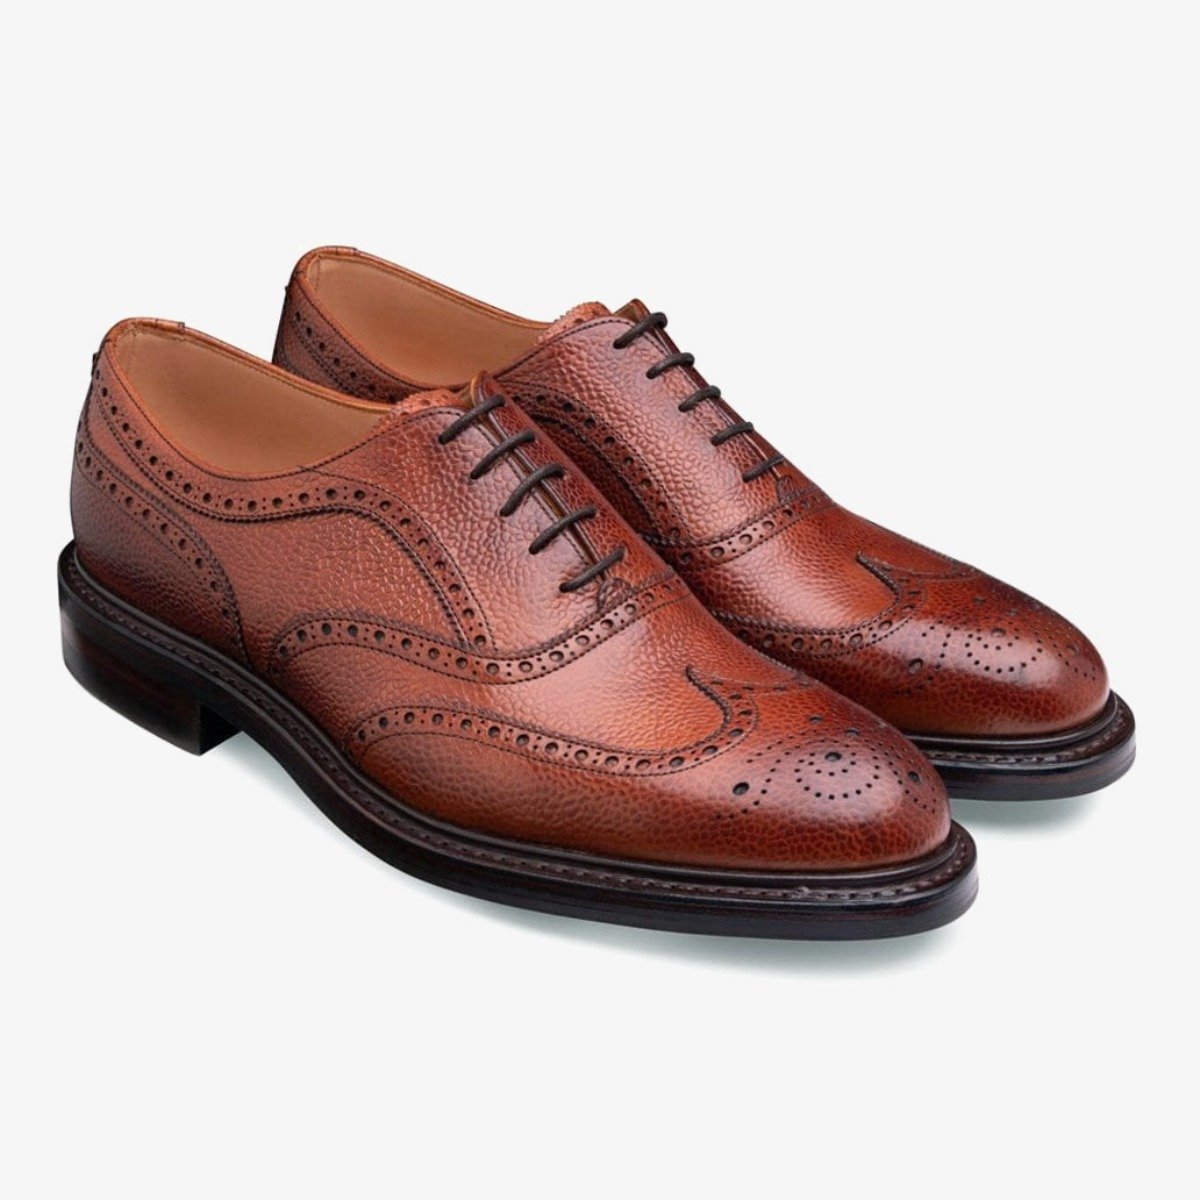 Cheaney Hythe II mahogany brogue men's oxford shoes